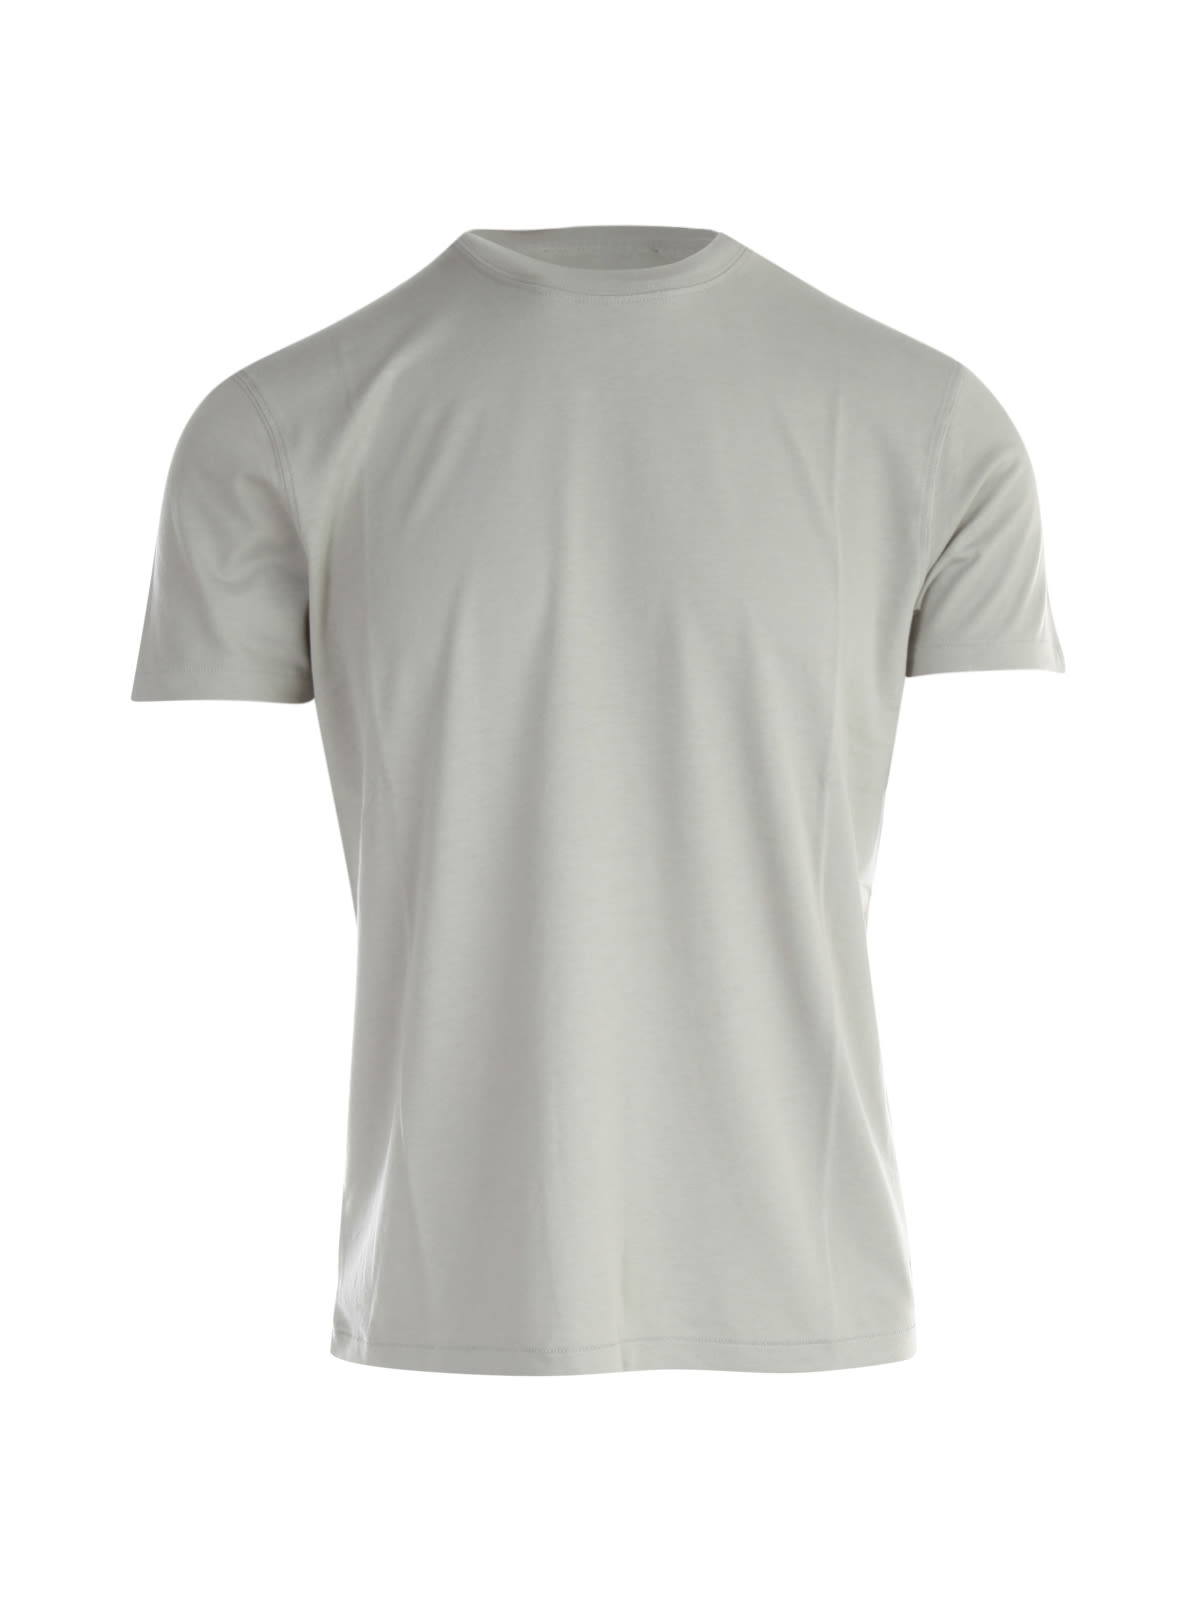 Tom Ford Viscose Cotton S/s T-shirt